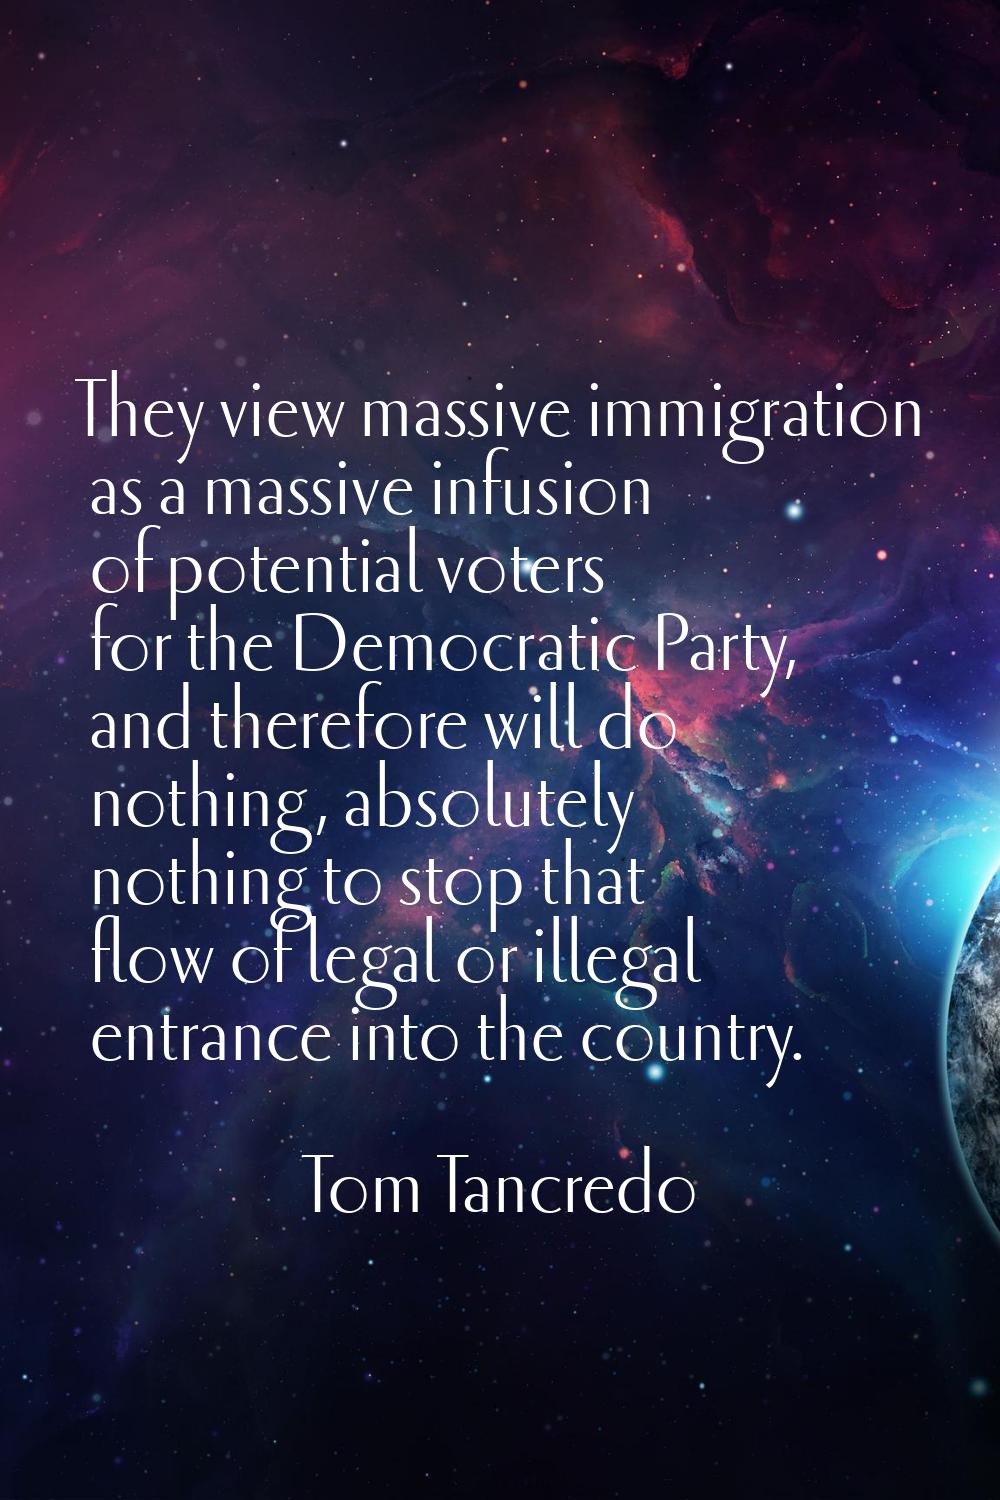 They view massive immigration as a massive infusion of potential voters for the Democratic Party, a